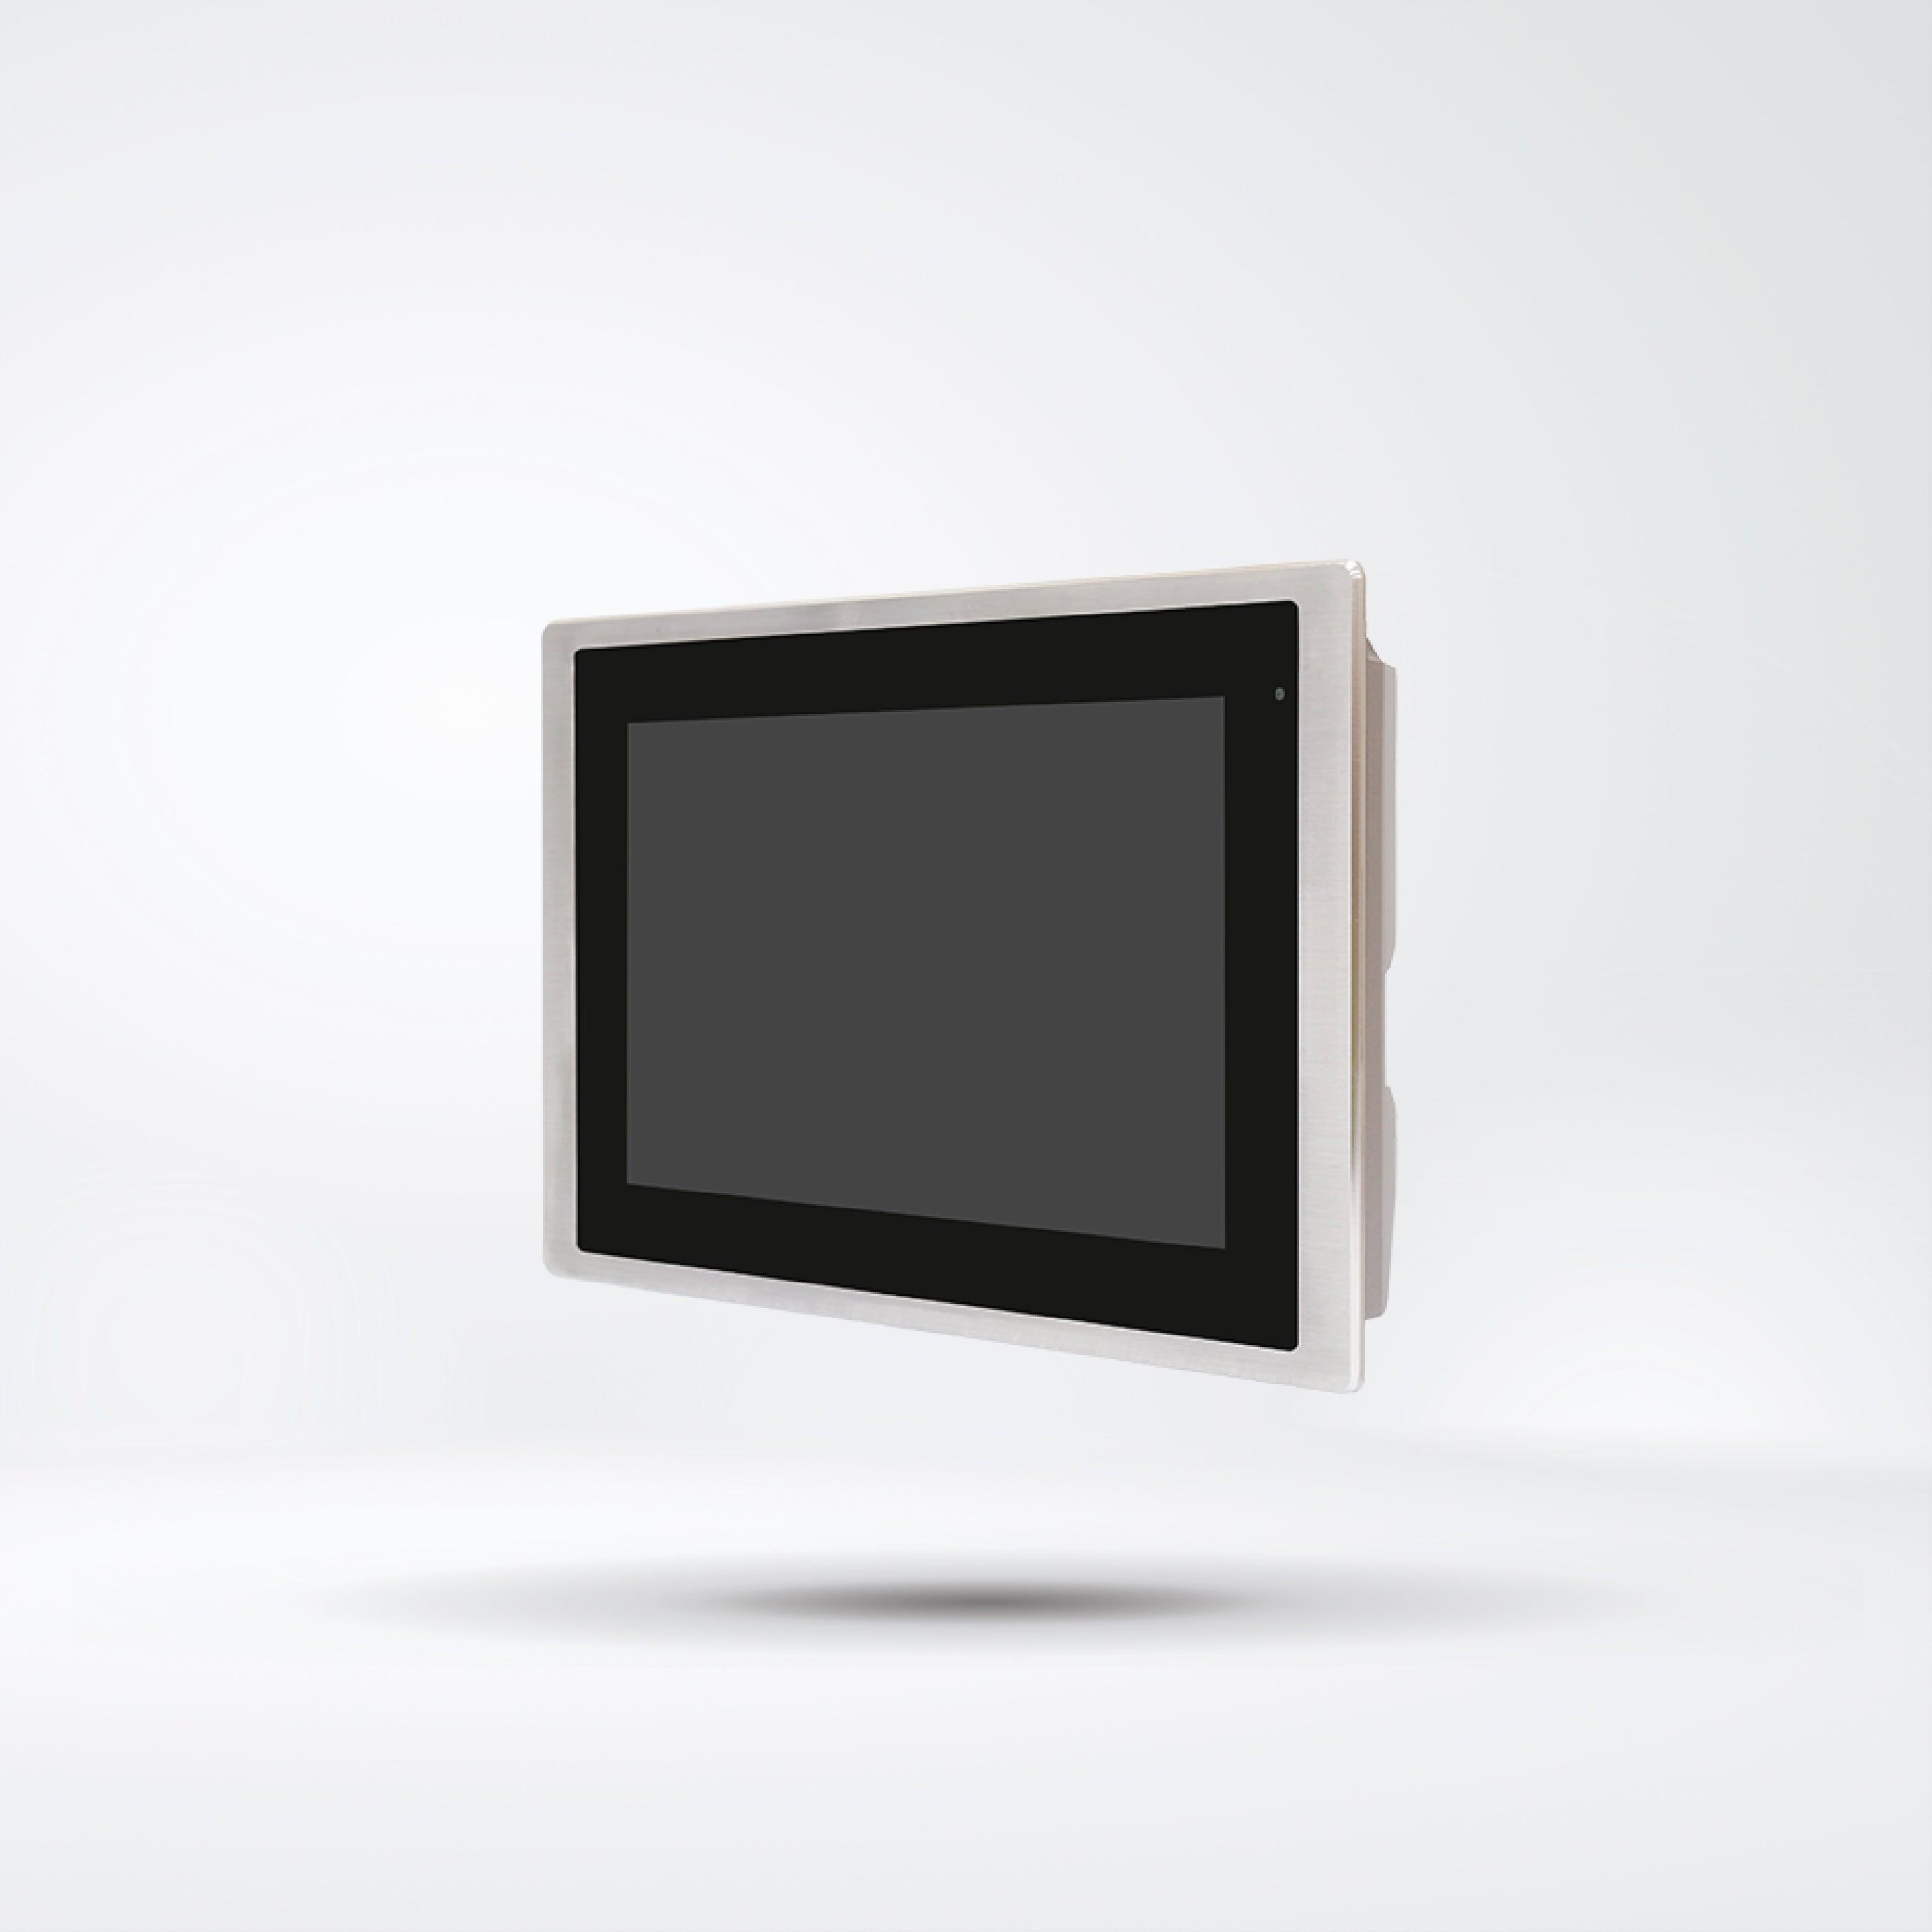 FABS-110G 10.1” Flat Front Panel IP66 Stainless Chassis Display - Riverplus